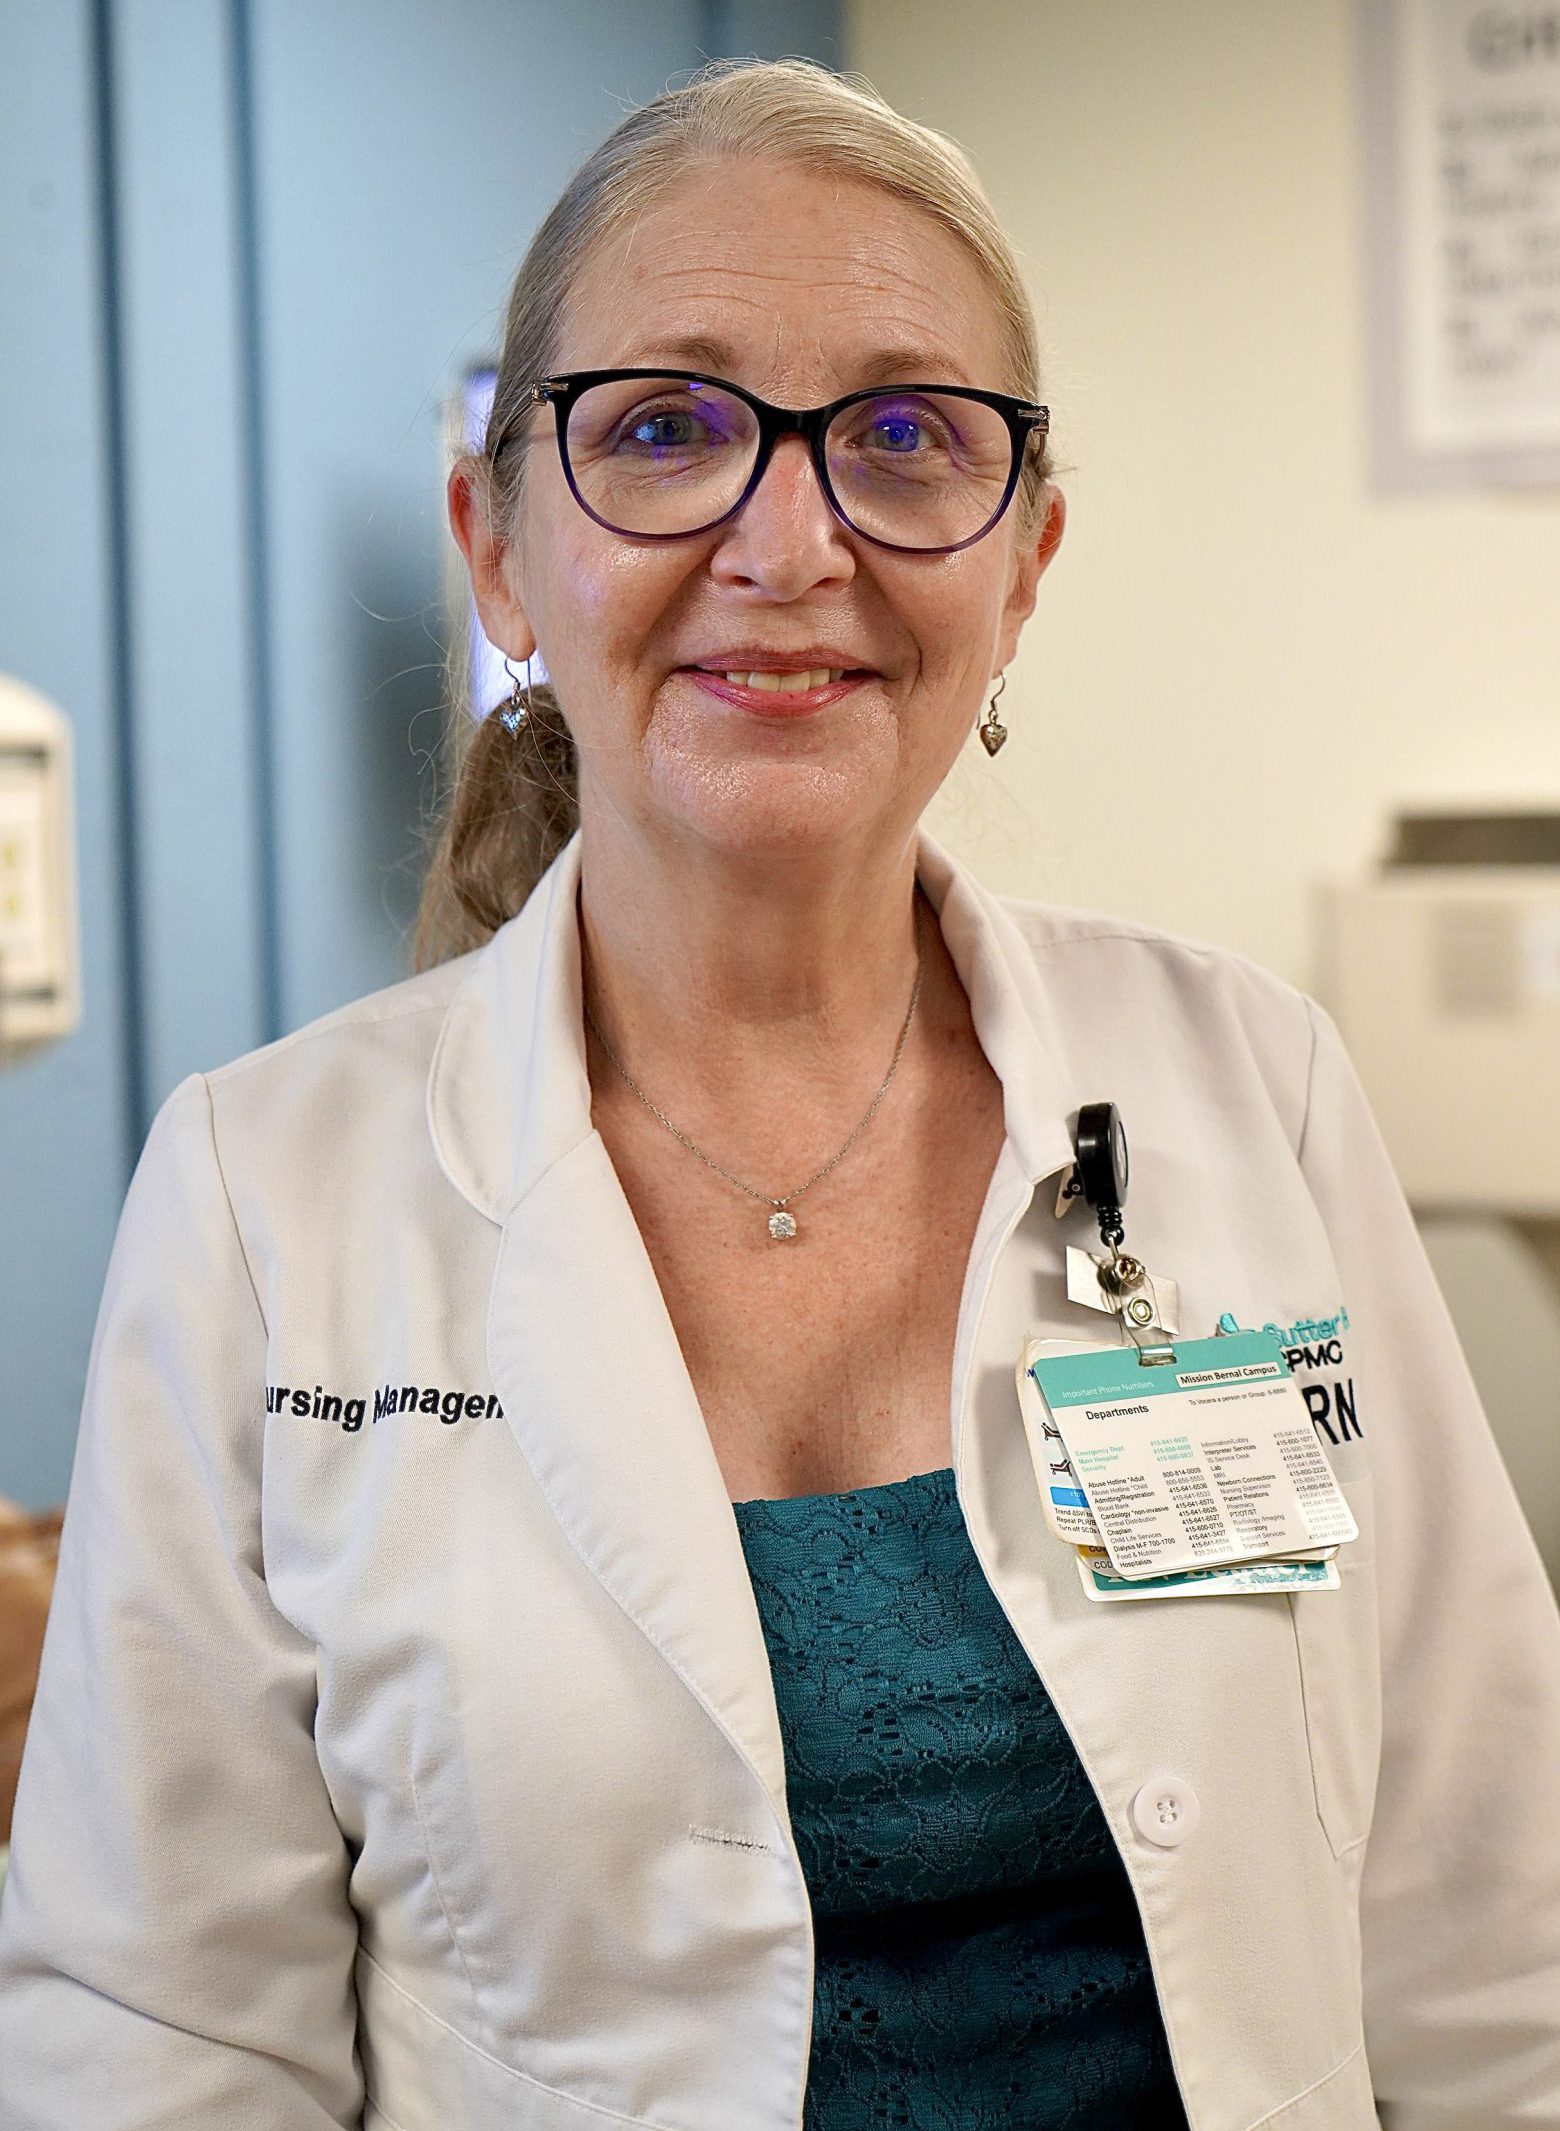 Delynn Peltz, director of nursing practice and quality at Sutter's CPMC